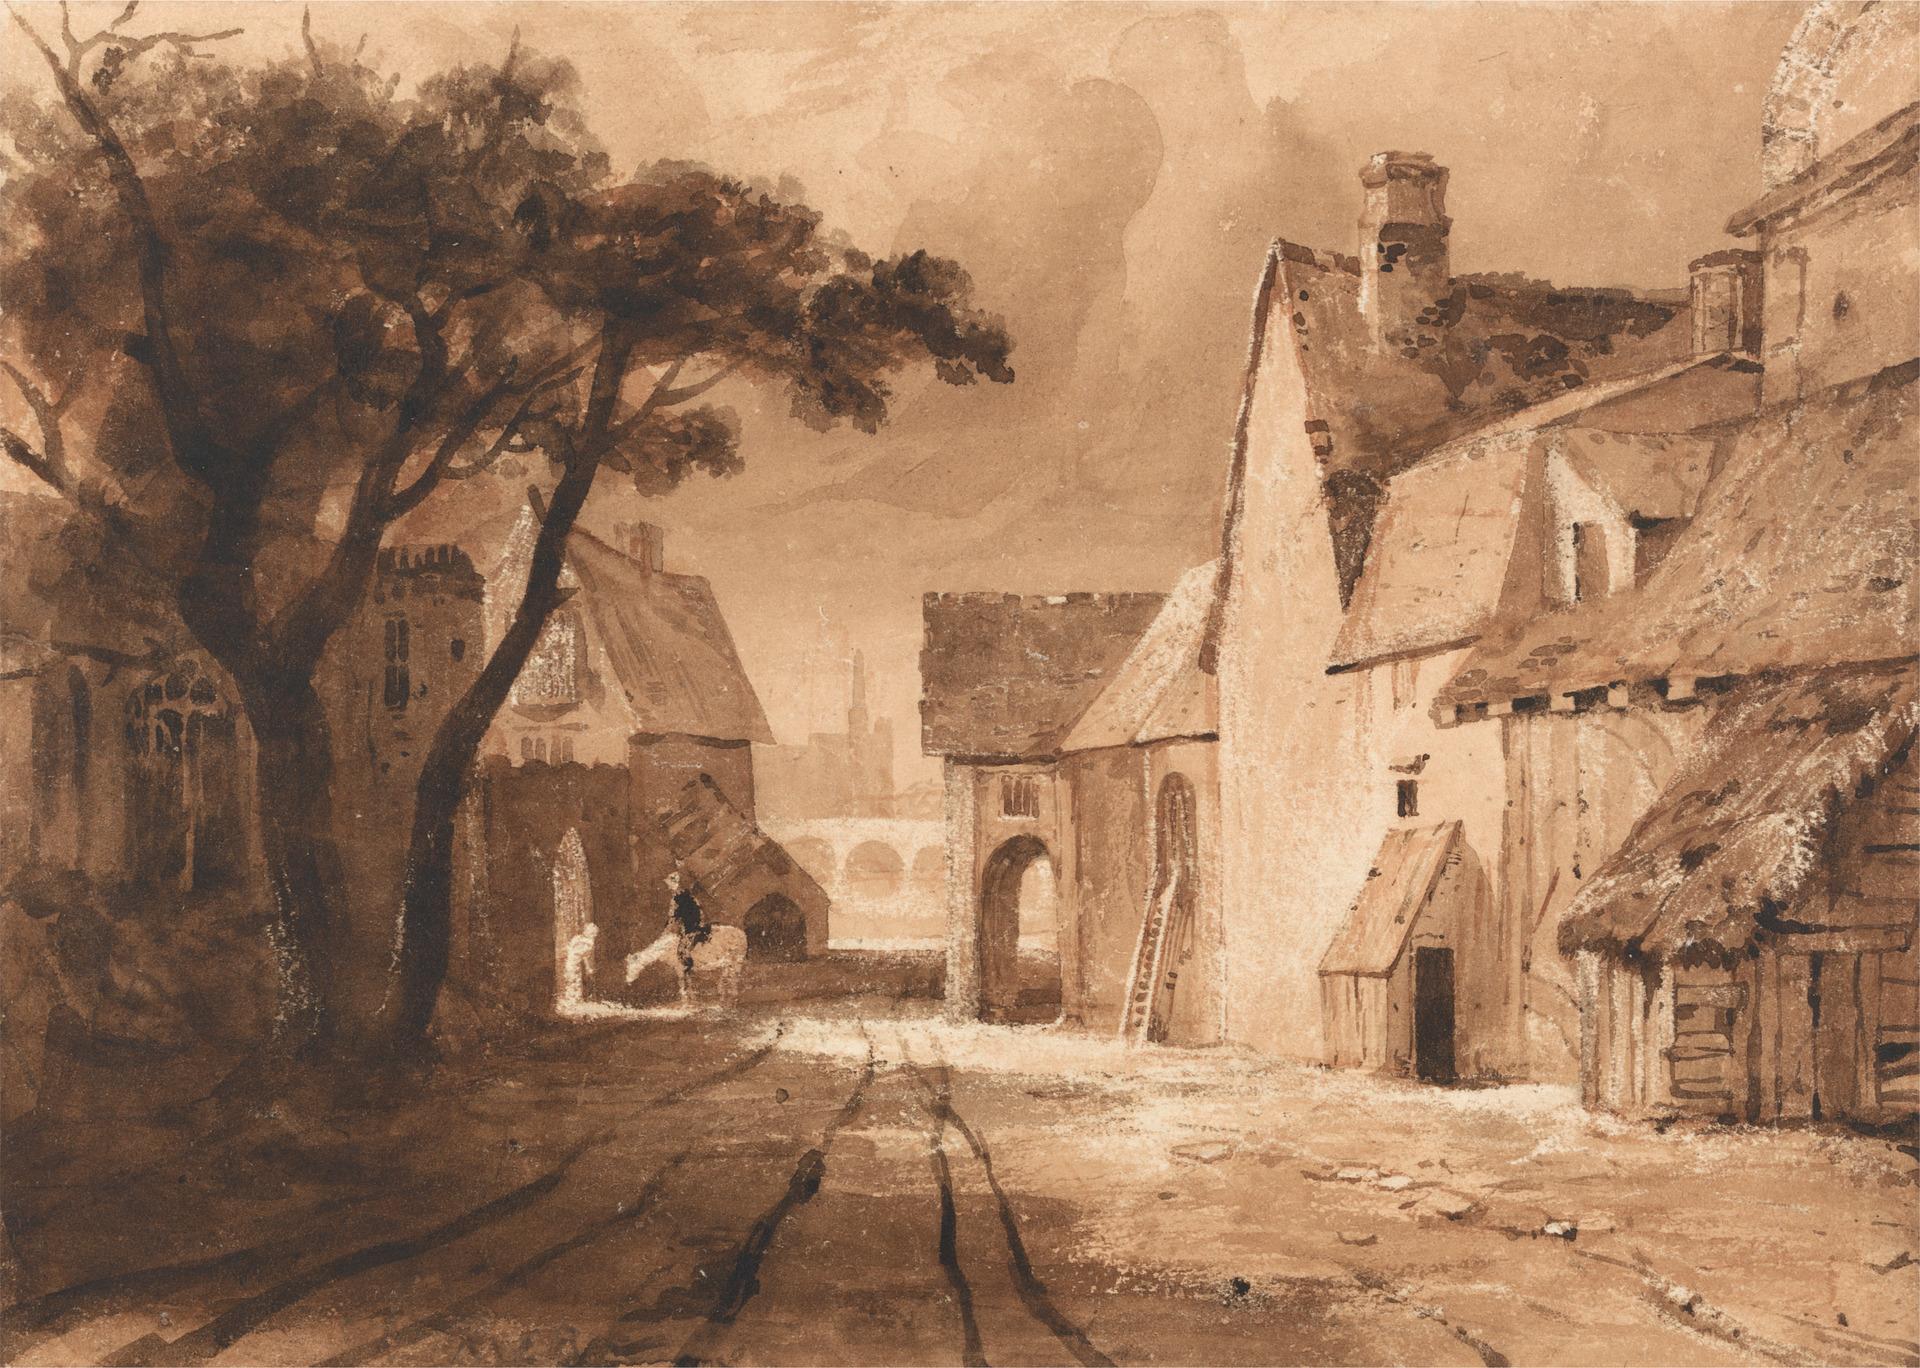 Sketch of old buildings with tree on left